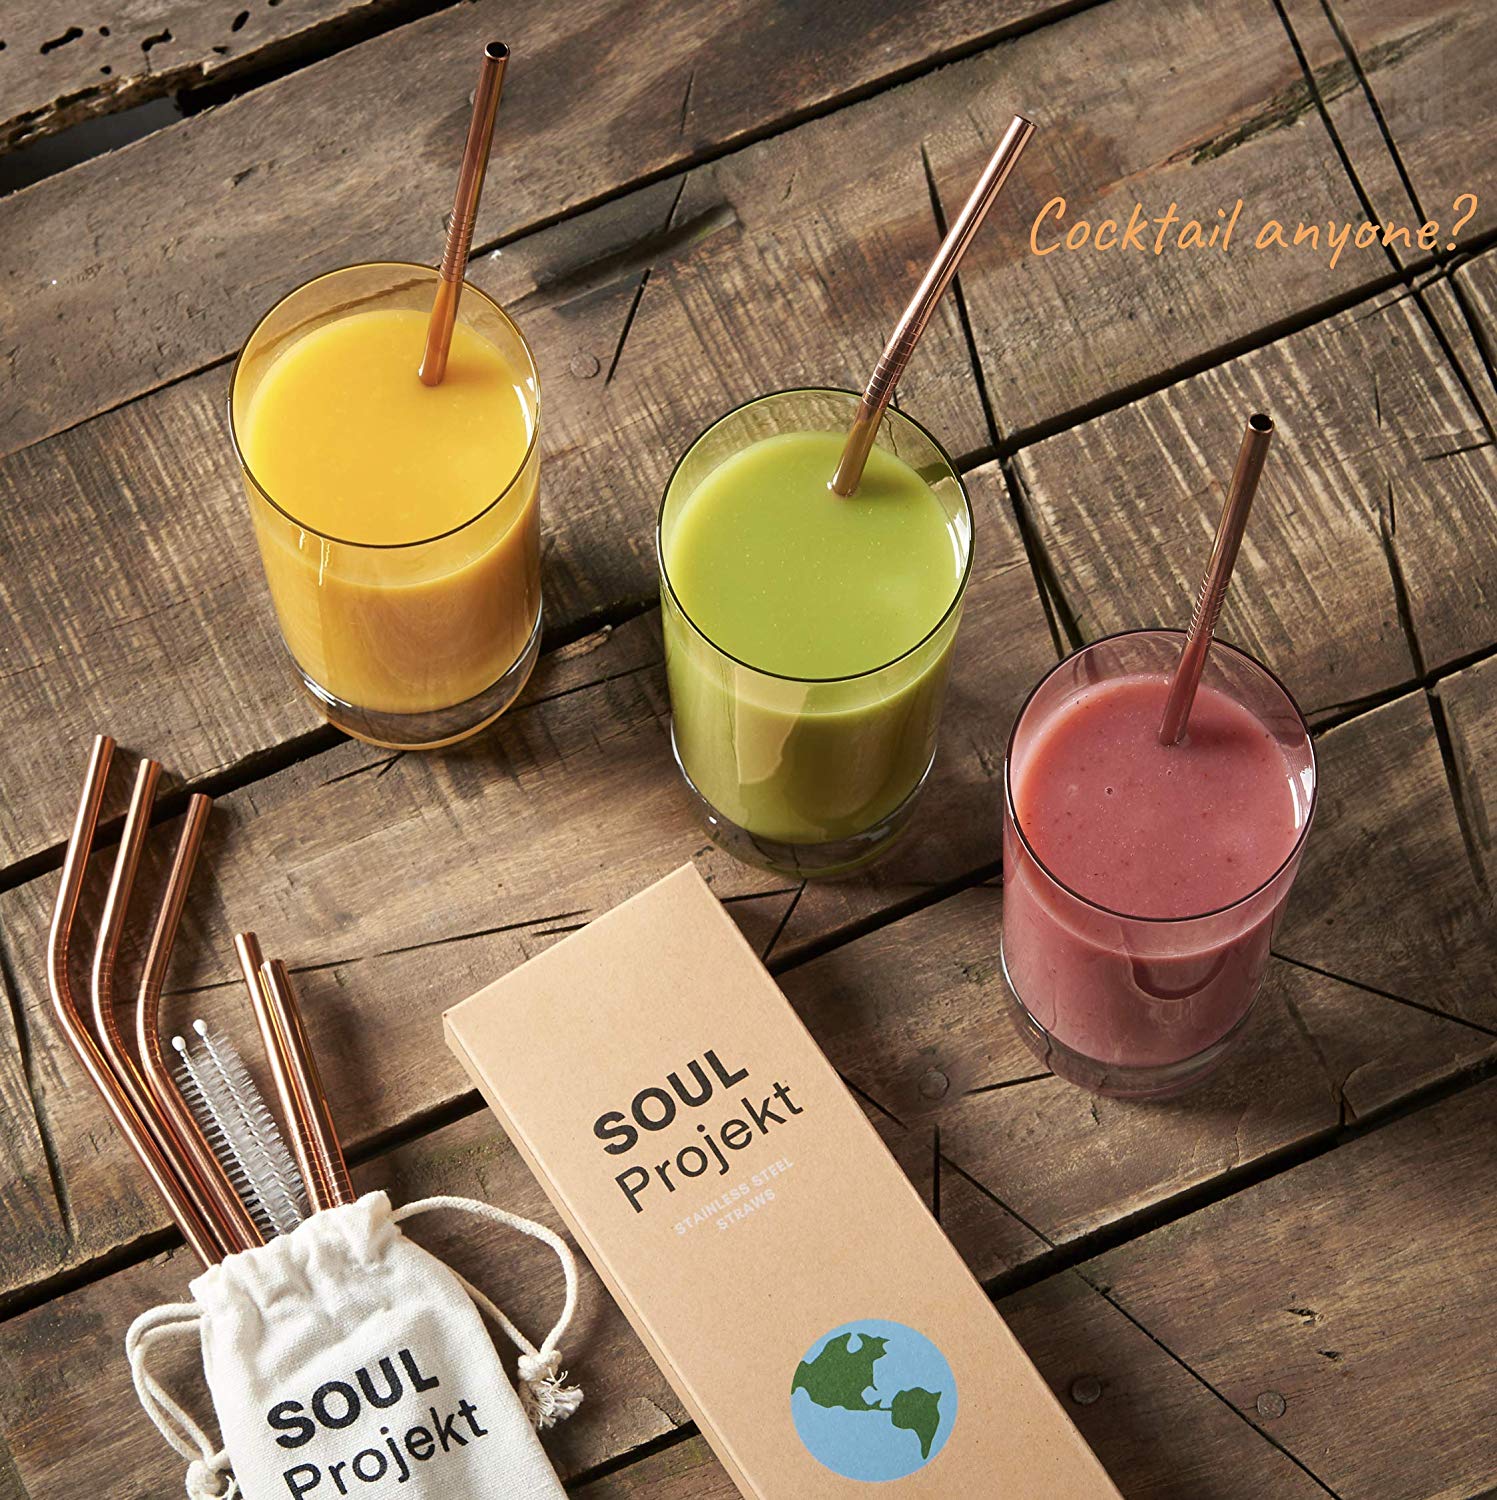 Soul Projekt 8x Rose Gold Reusable Stainless Steel Straws with 2 x Cleaning Brush and Gift Pouch